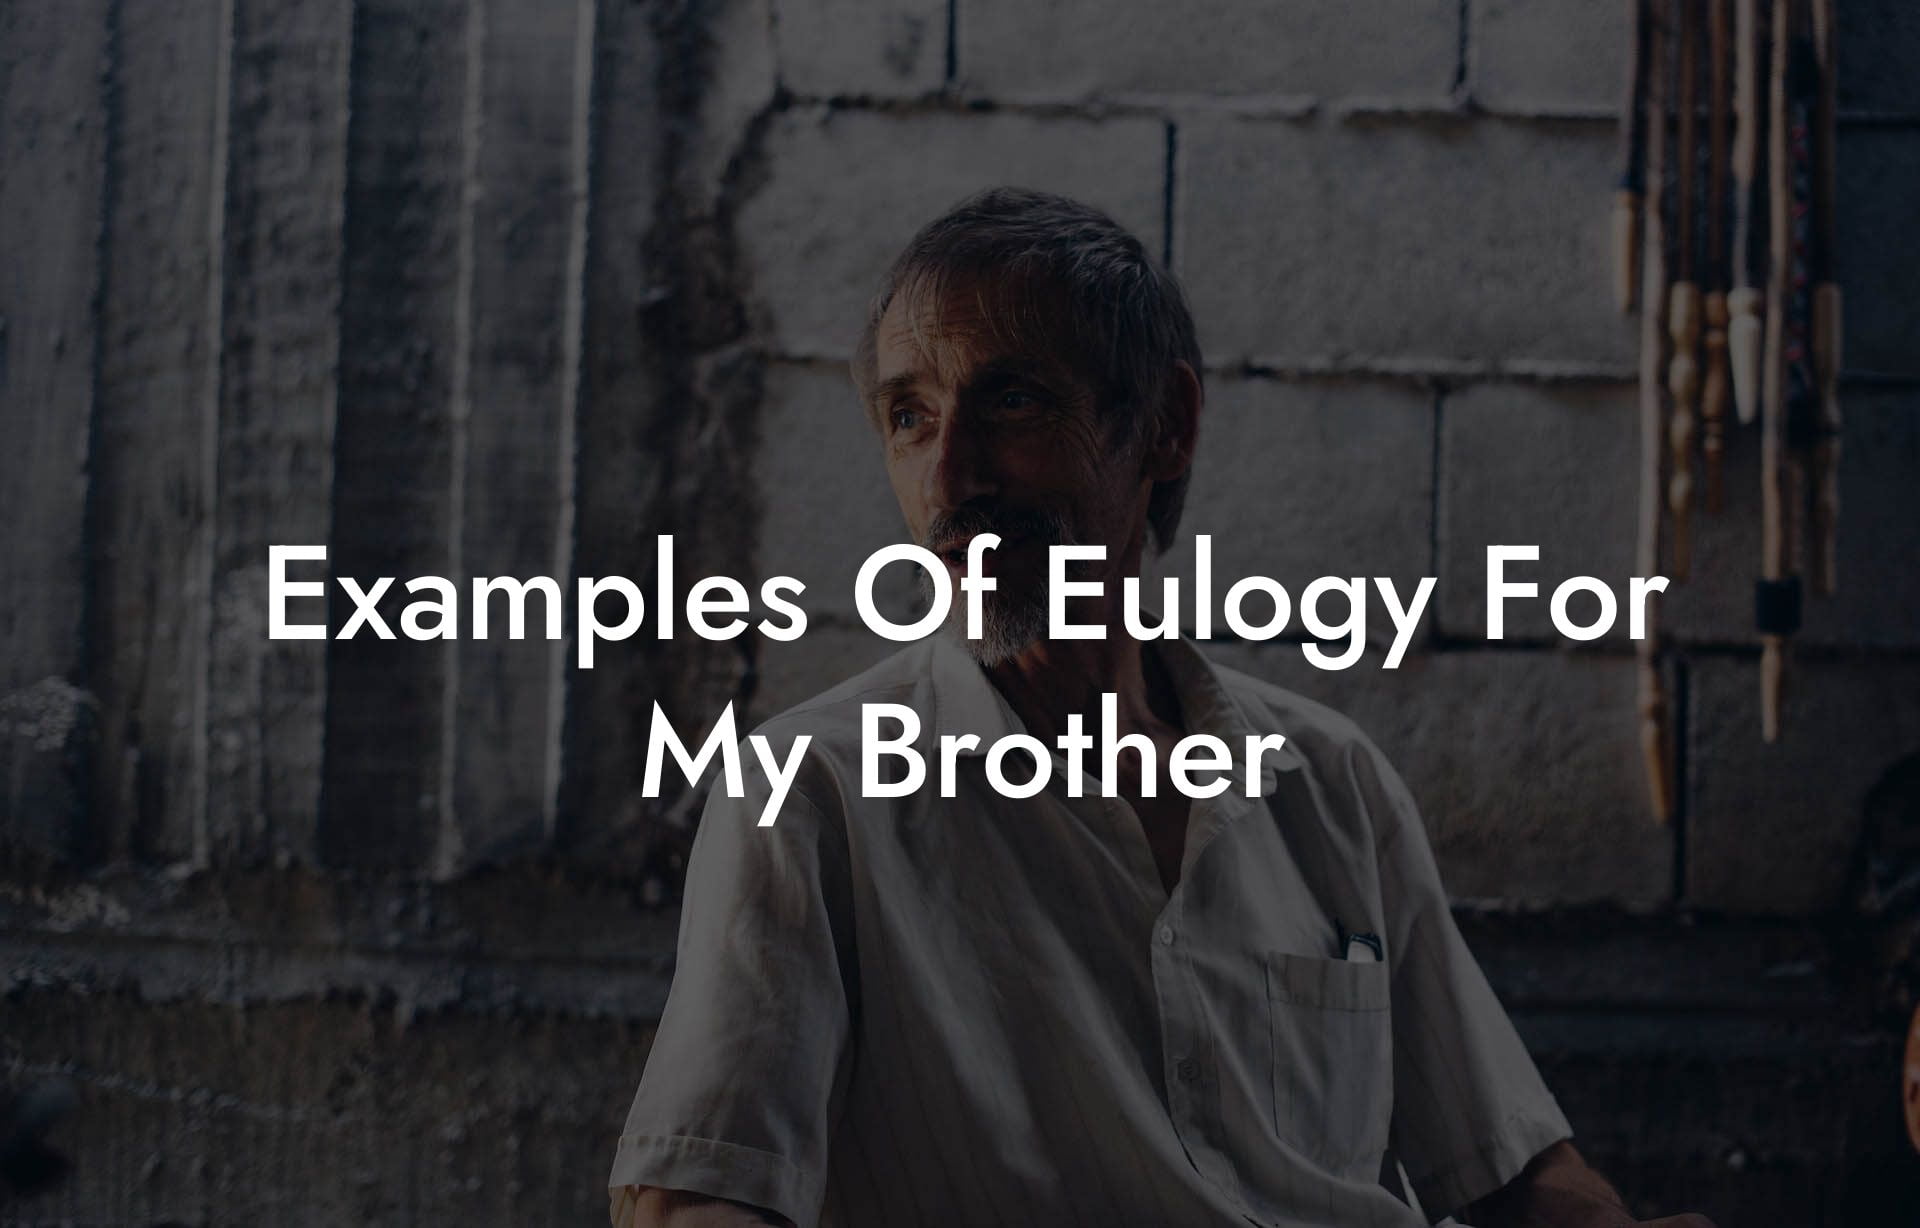 examples-of-eulogy-for-my-brother-eulogy-assistant